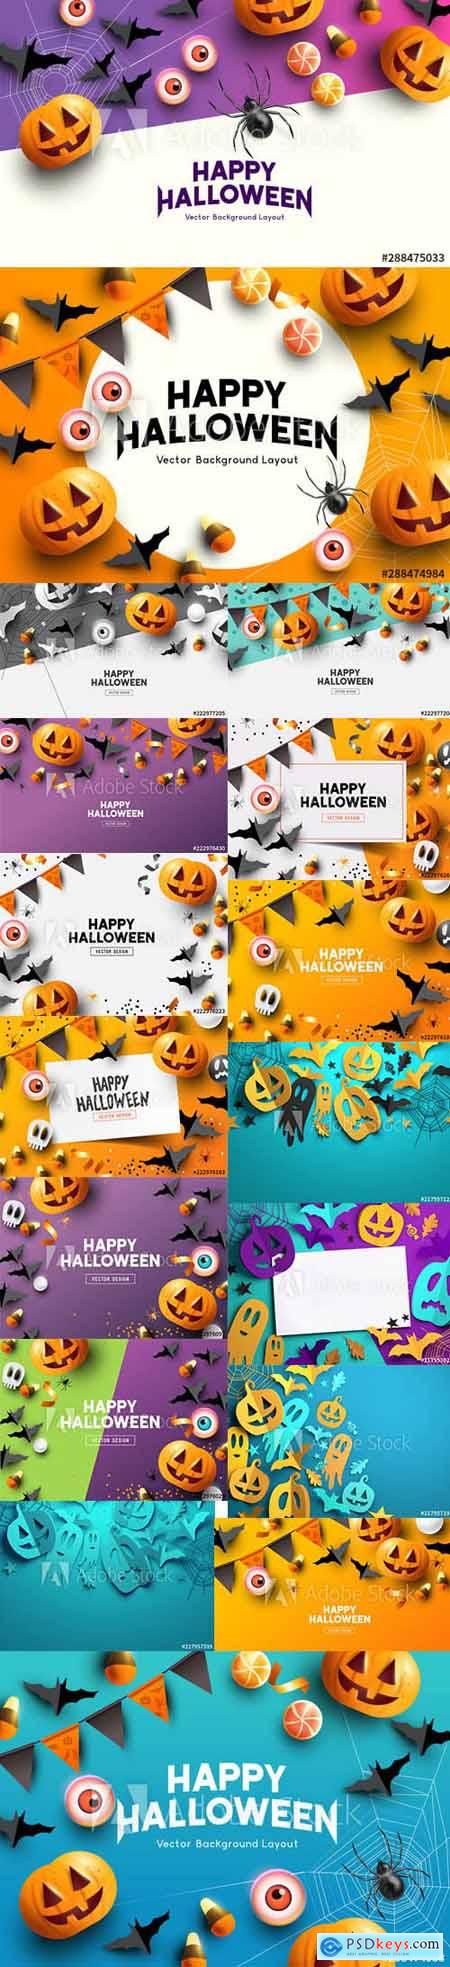 Set of Halloween Themed Party Backgrounds and Decorations